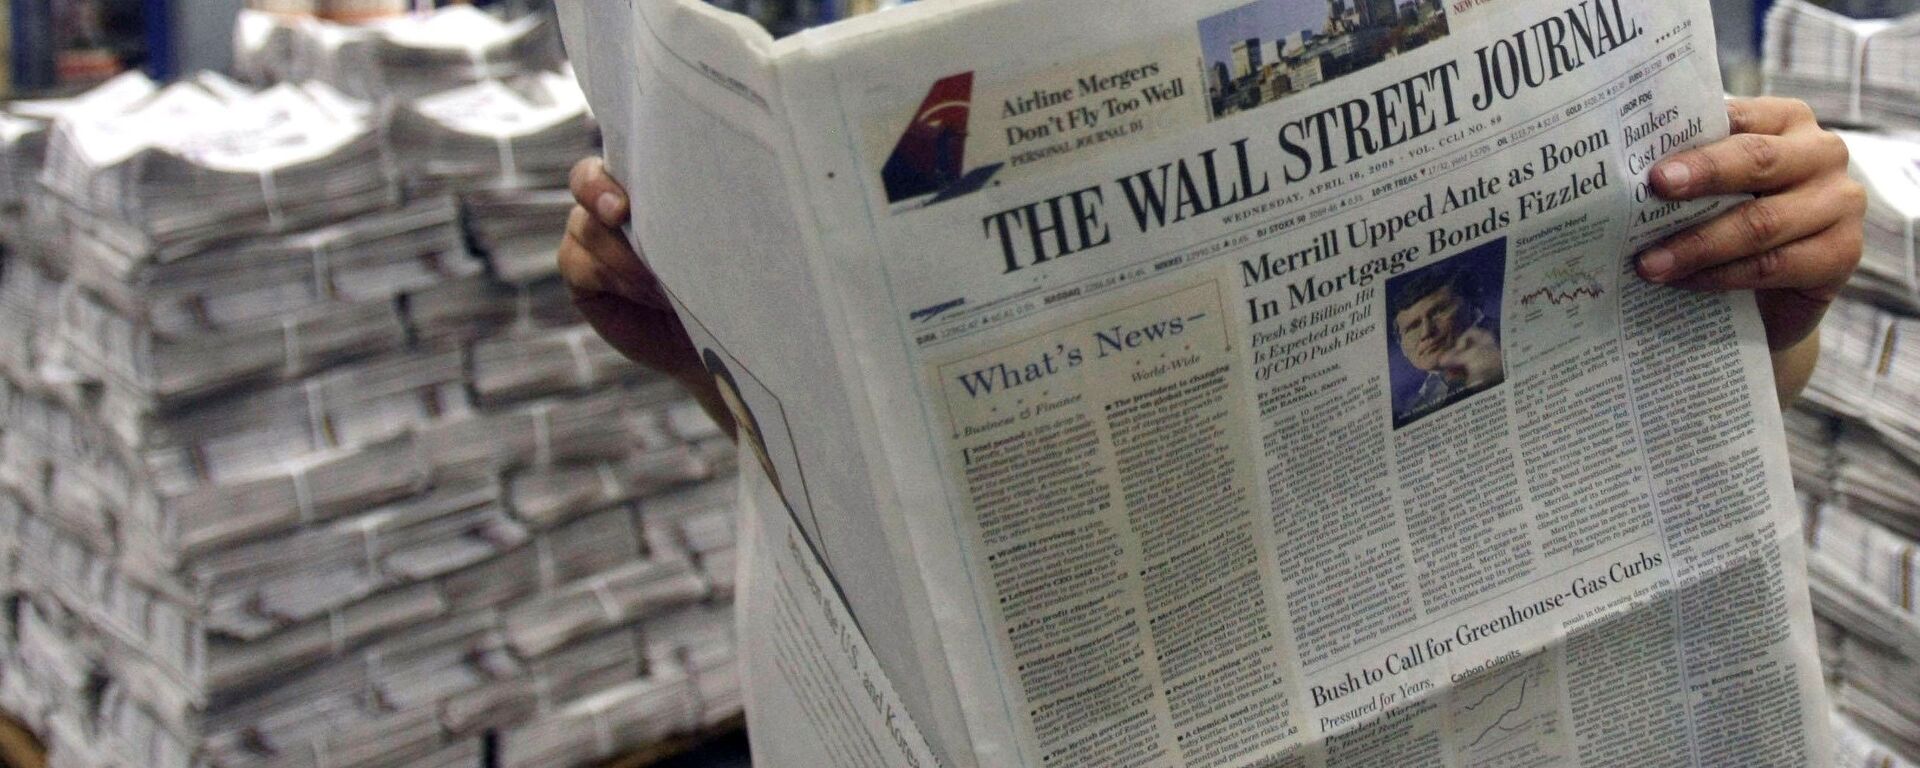 ** FILE ** In this April 16, 2008 file photo, printer Belinda Affat poses for photographs with a copy of the Wall Street Journal at a printing press in London.  A year into its takeover by Rupert Murdoch's News Corp., The Wall Street Journal is evolving under what its new editor calls incremental radicalism.  Steeped in tradition, the 119-year-old newspaper has expanded its coverage beyond corporate America, placed more breaking stories on the front page and increased the size of photos and graphics. (AP Photo/Matt Dunham, file) - Sputnik International, 1920, 30.07.2022